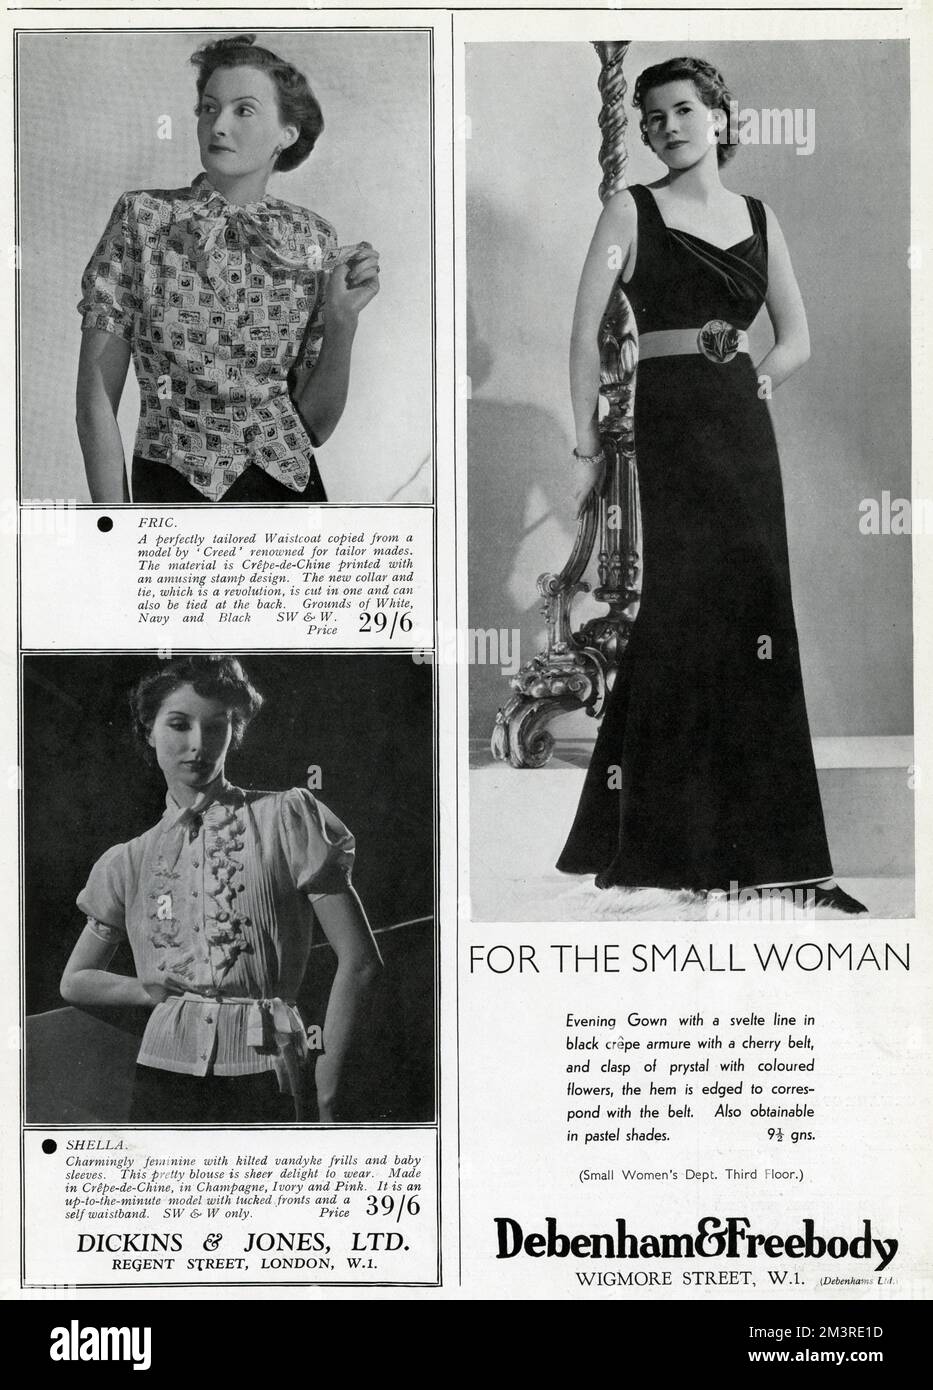 Two fashion adverts for Dickins & Jones, Ltd, modelling the latest short sleeved blouses and Debenham & Freebody, modelling a petit black crepe evening gown with cherry belt.     Date: 1937 Stock Photo